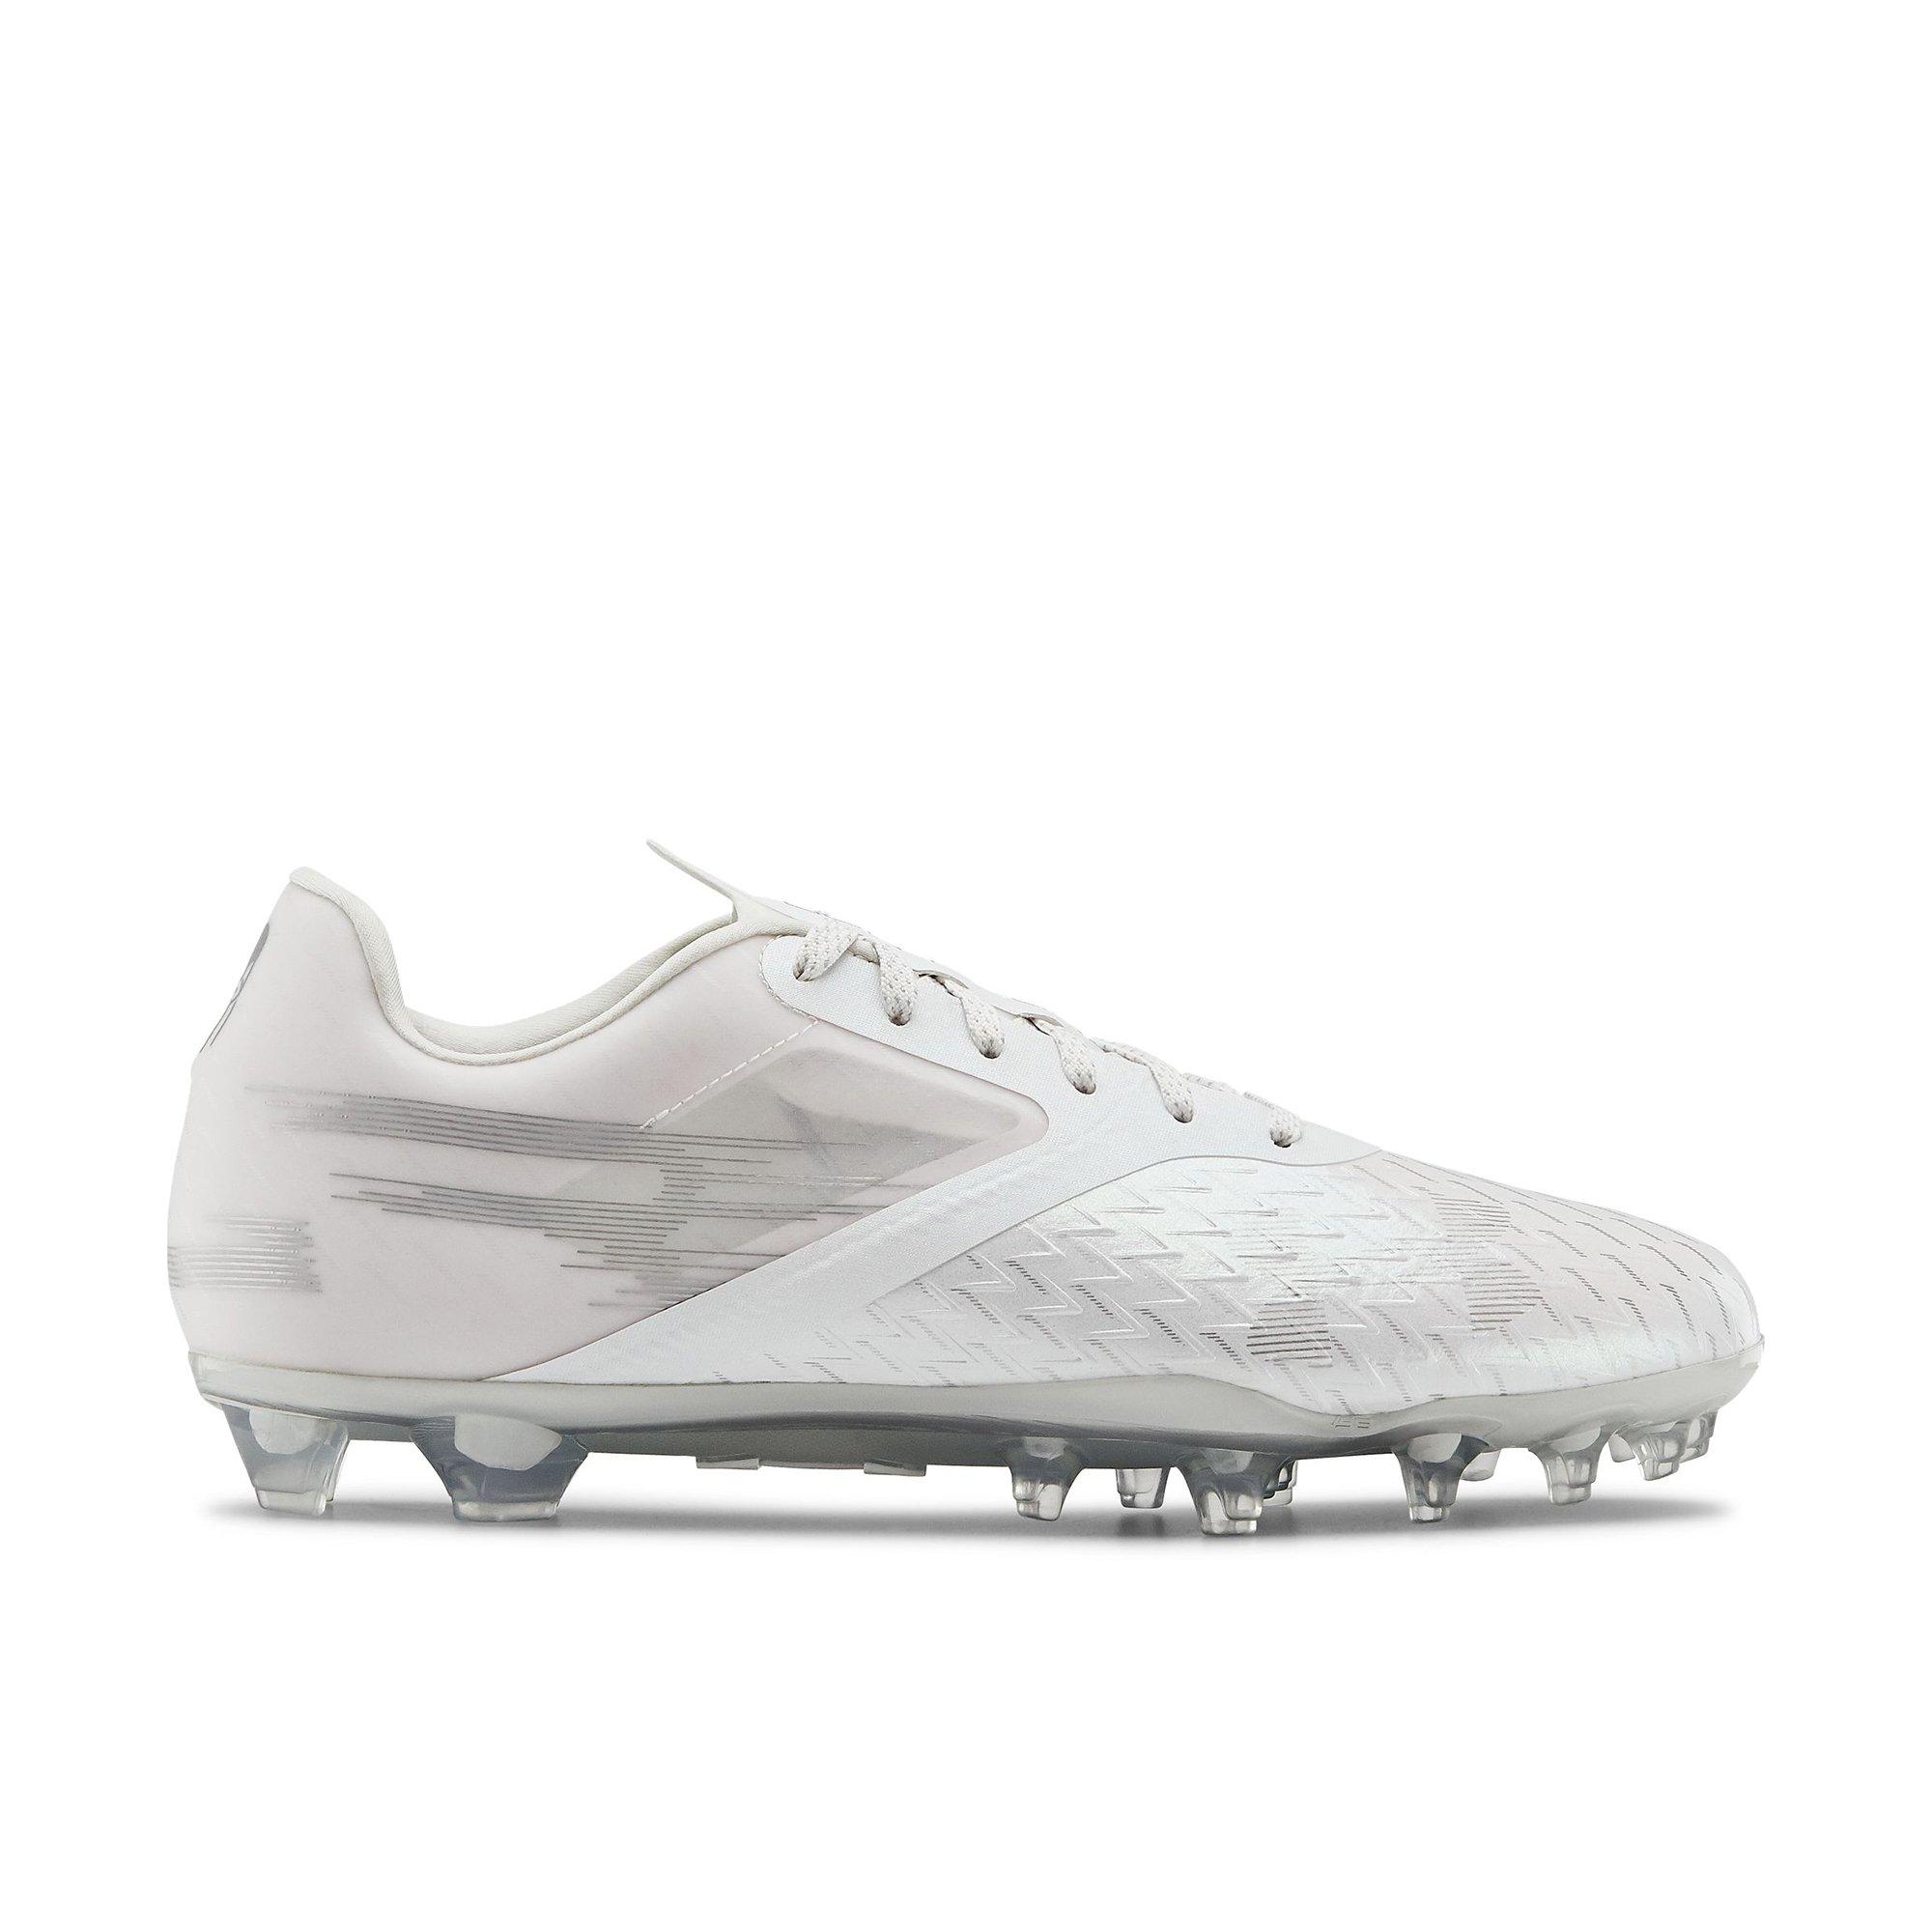 under armour football cleats all white